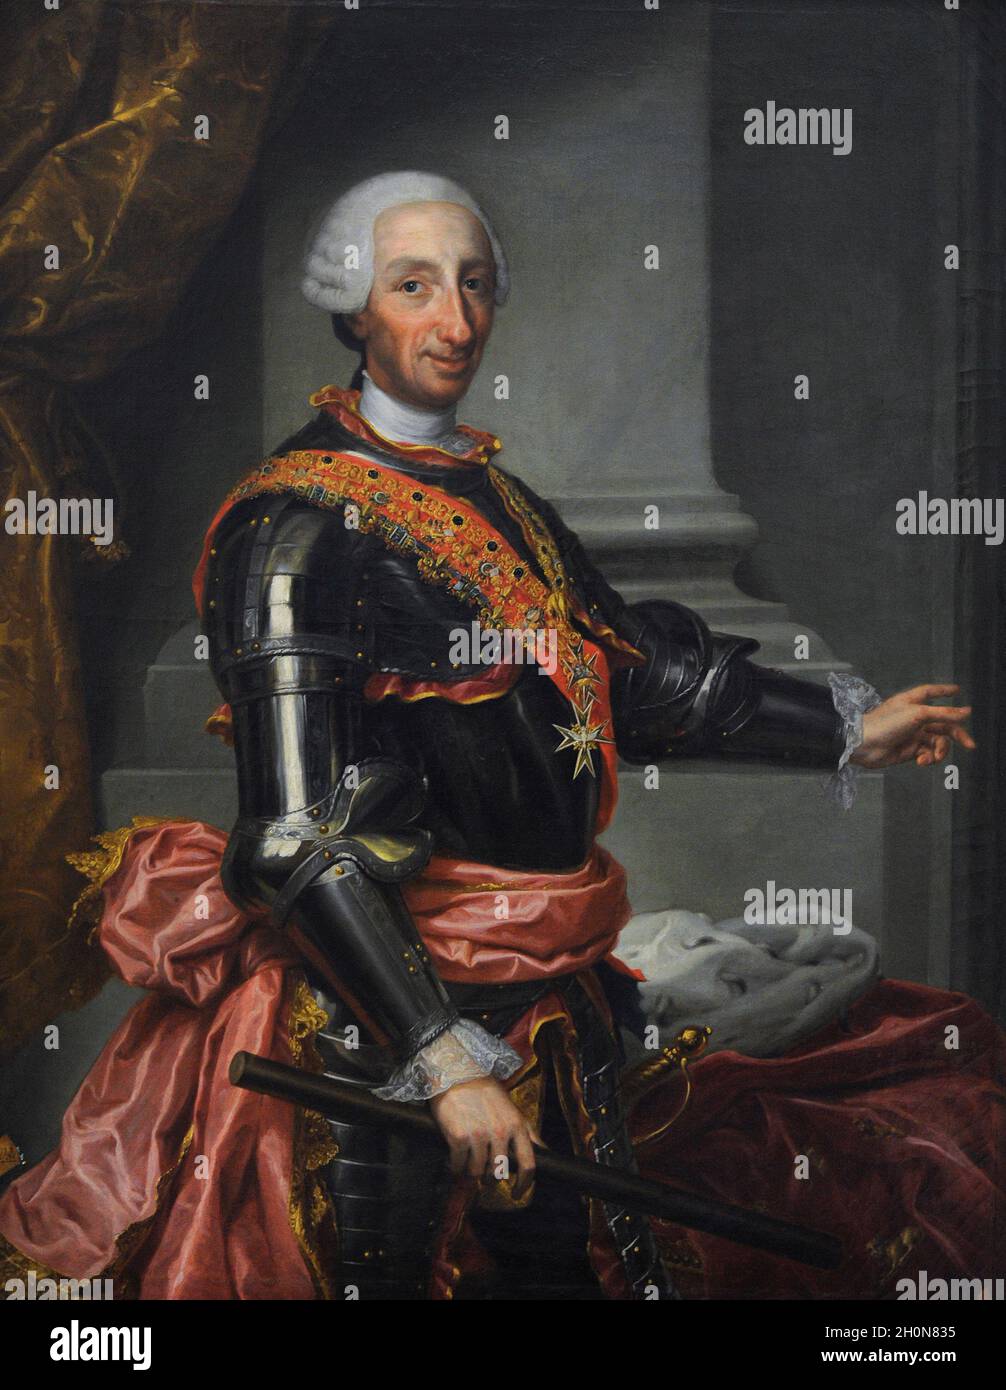 Charles III (1716-1788). King of Spain. Portrait by Andres de la Calleja (1705-1785), copy after a painting by Anton Rafael Mengs. San Fernando Royal Stock Photo